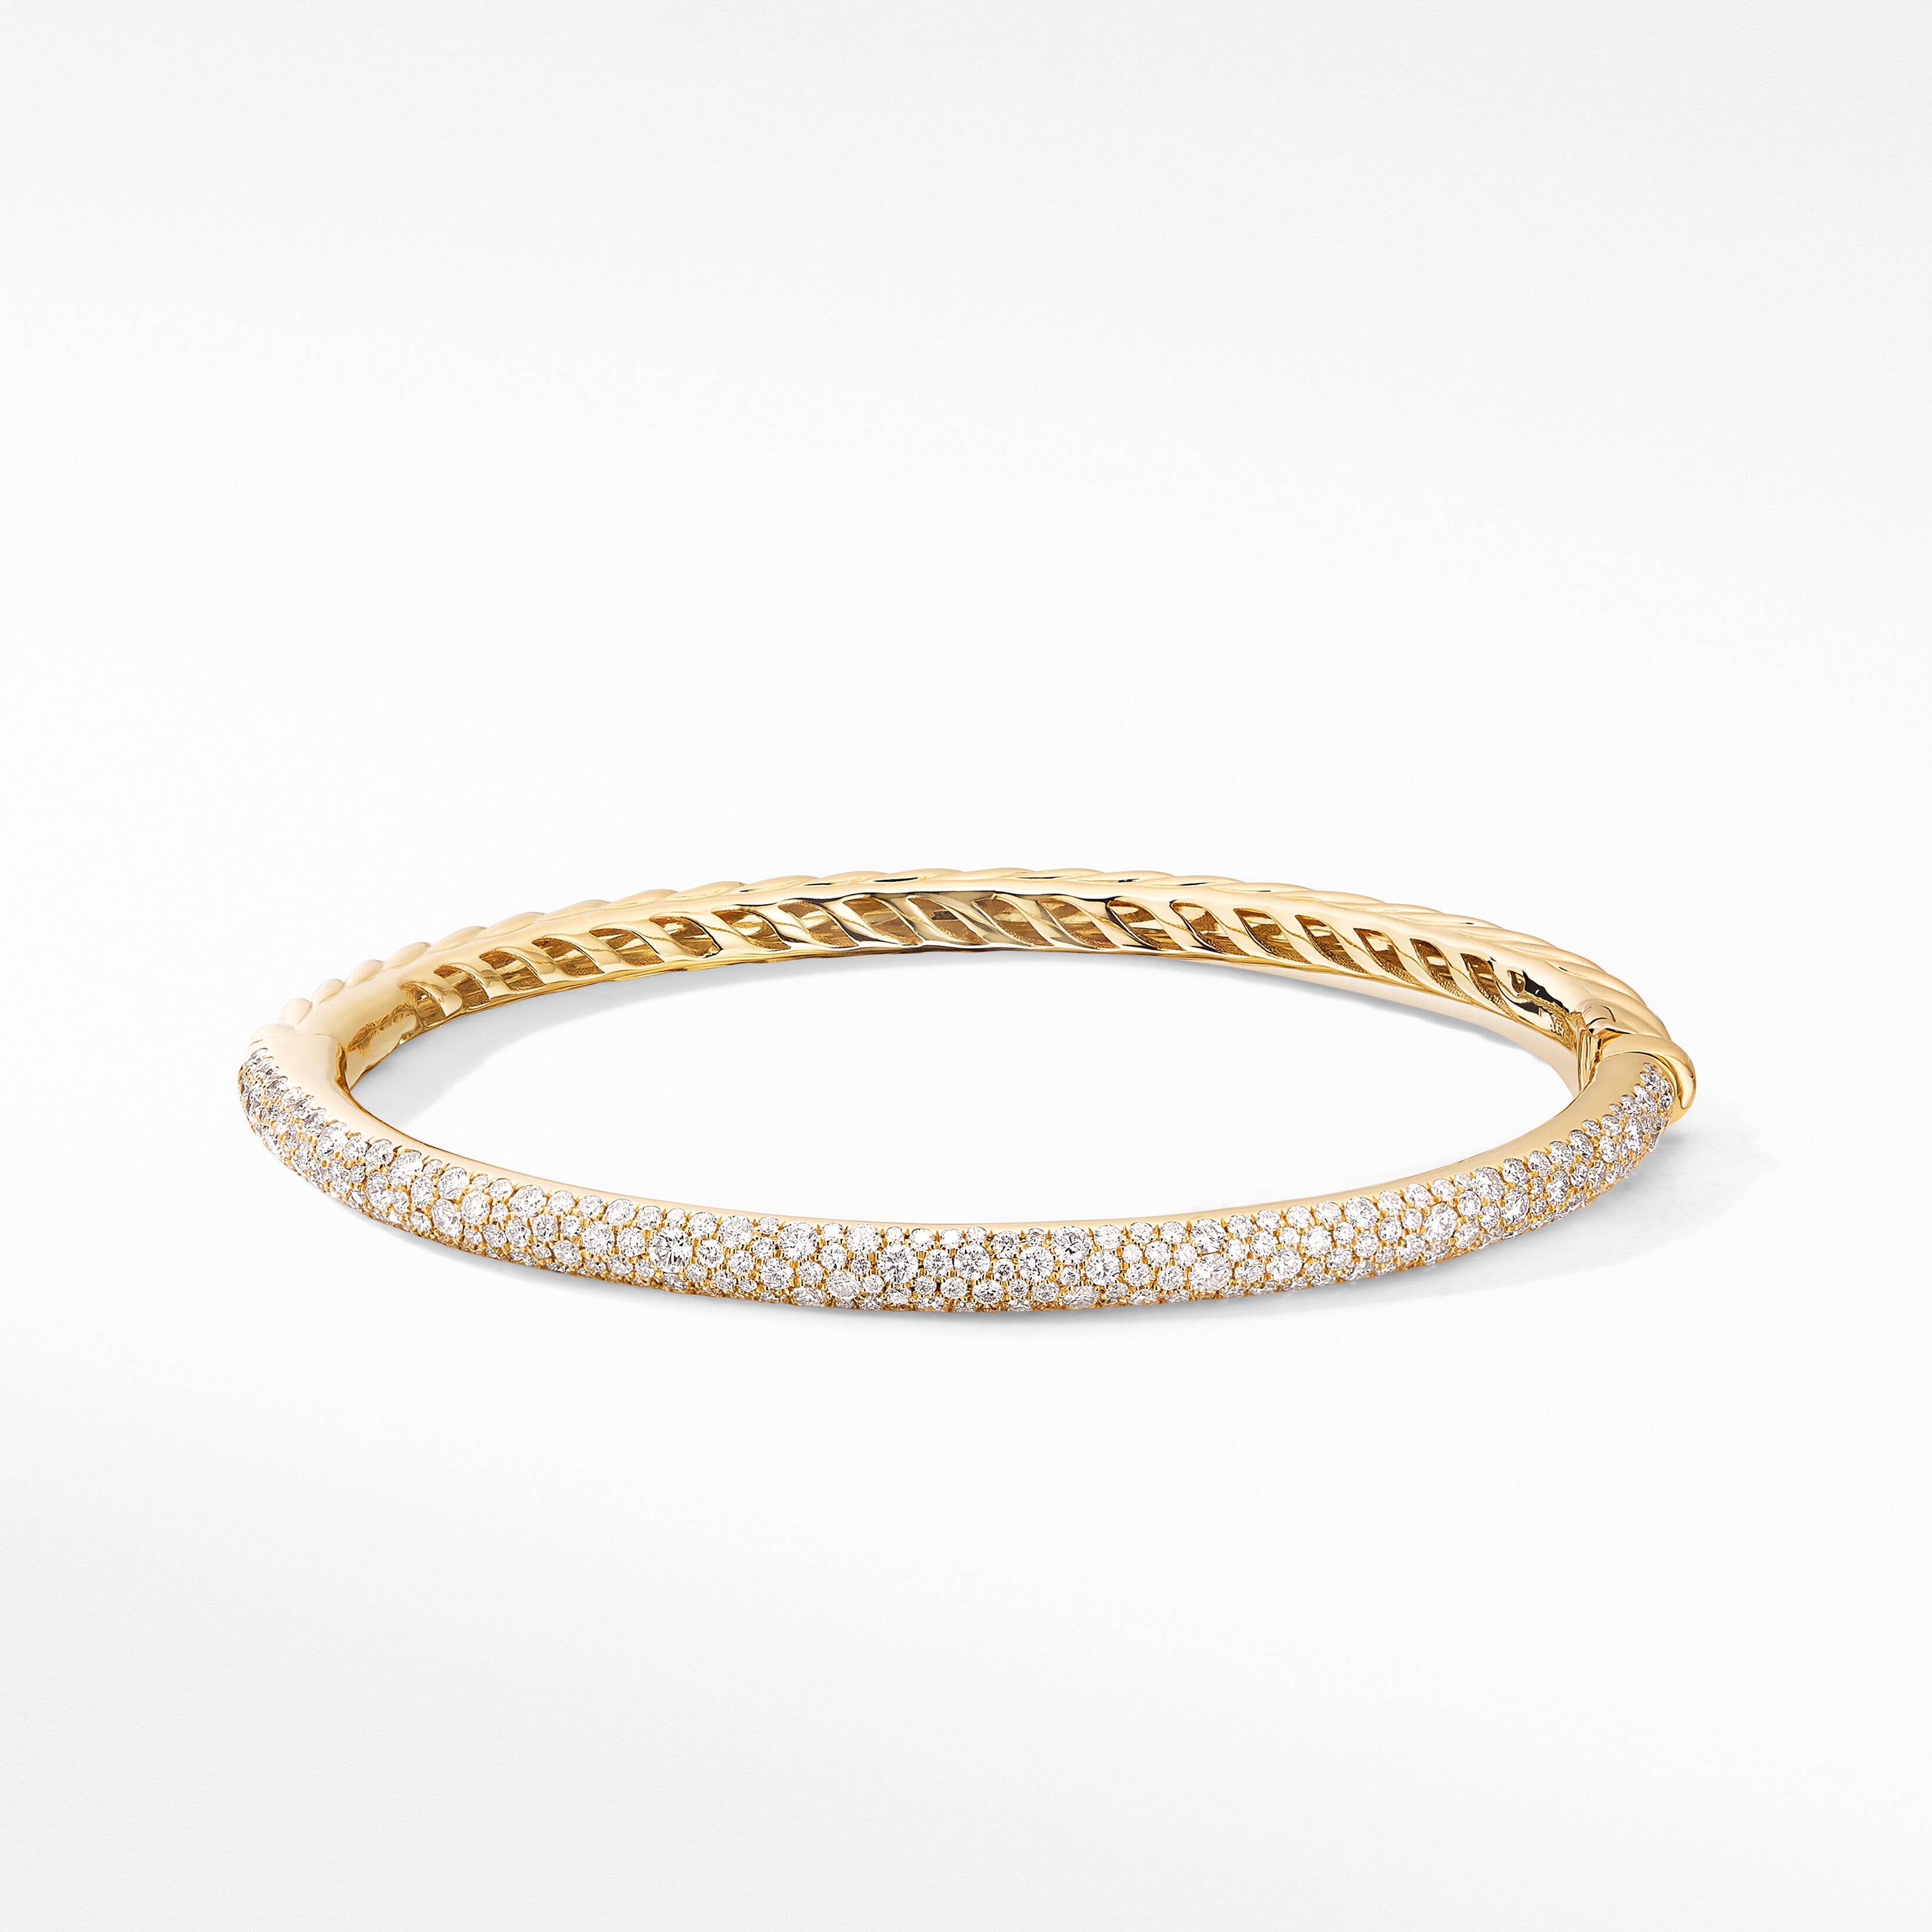 Cable Bangle Bracelet in 18K Yellow Gold with Pavé Diamonds